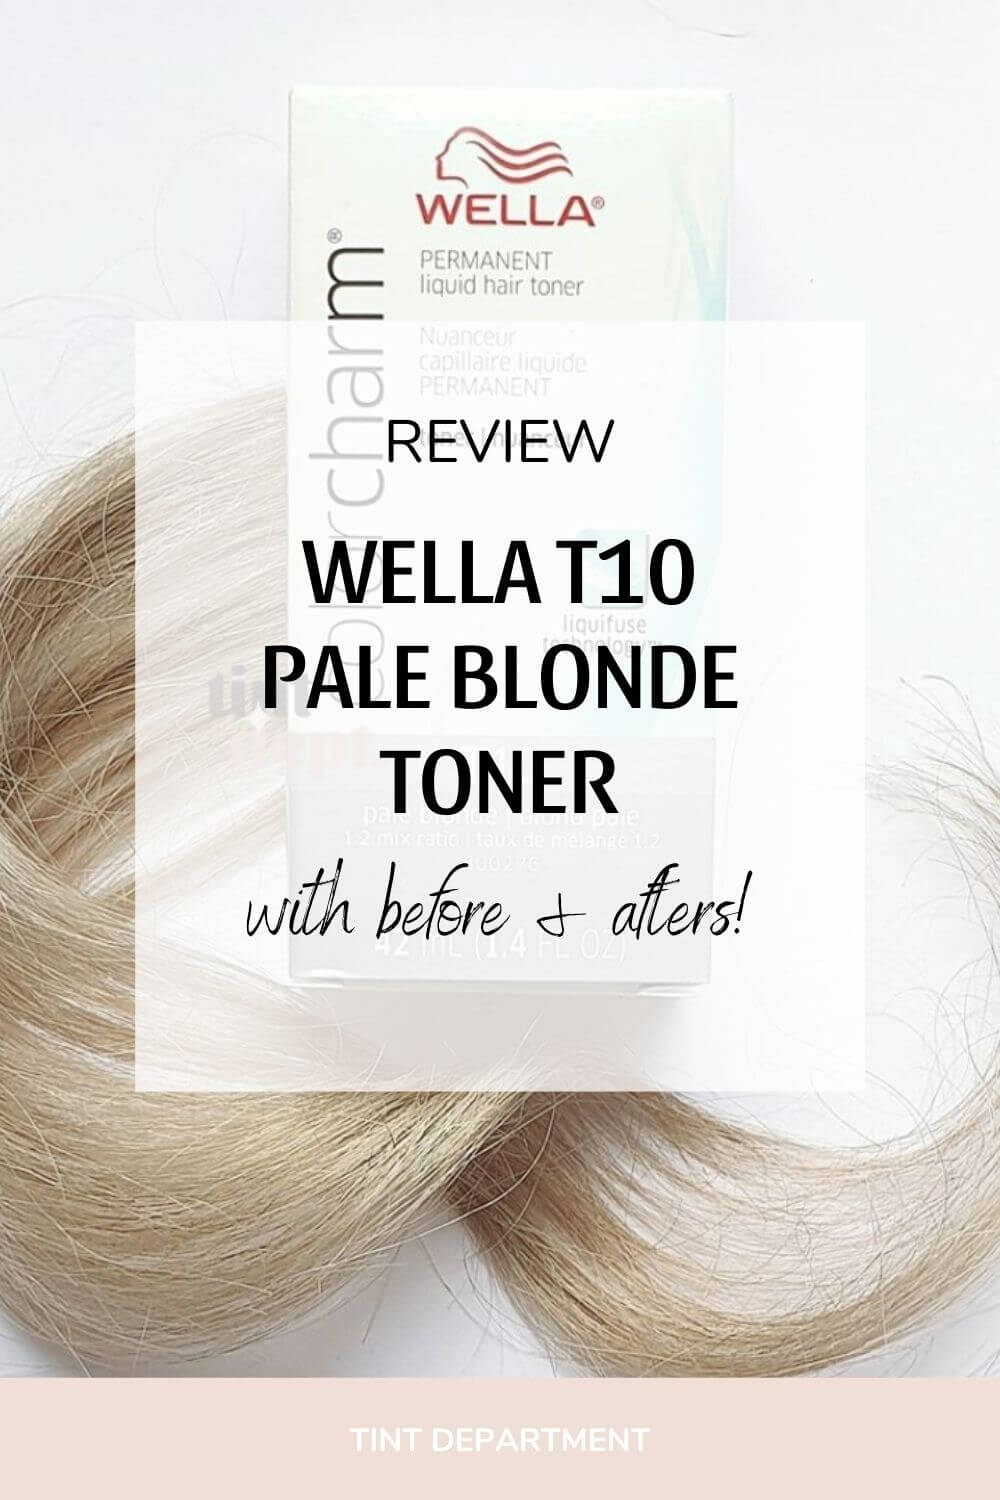 Wella T10 Toner Pale Blonde Review with Before and Afters